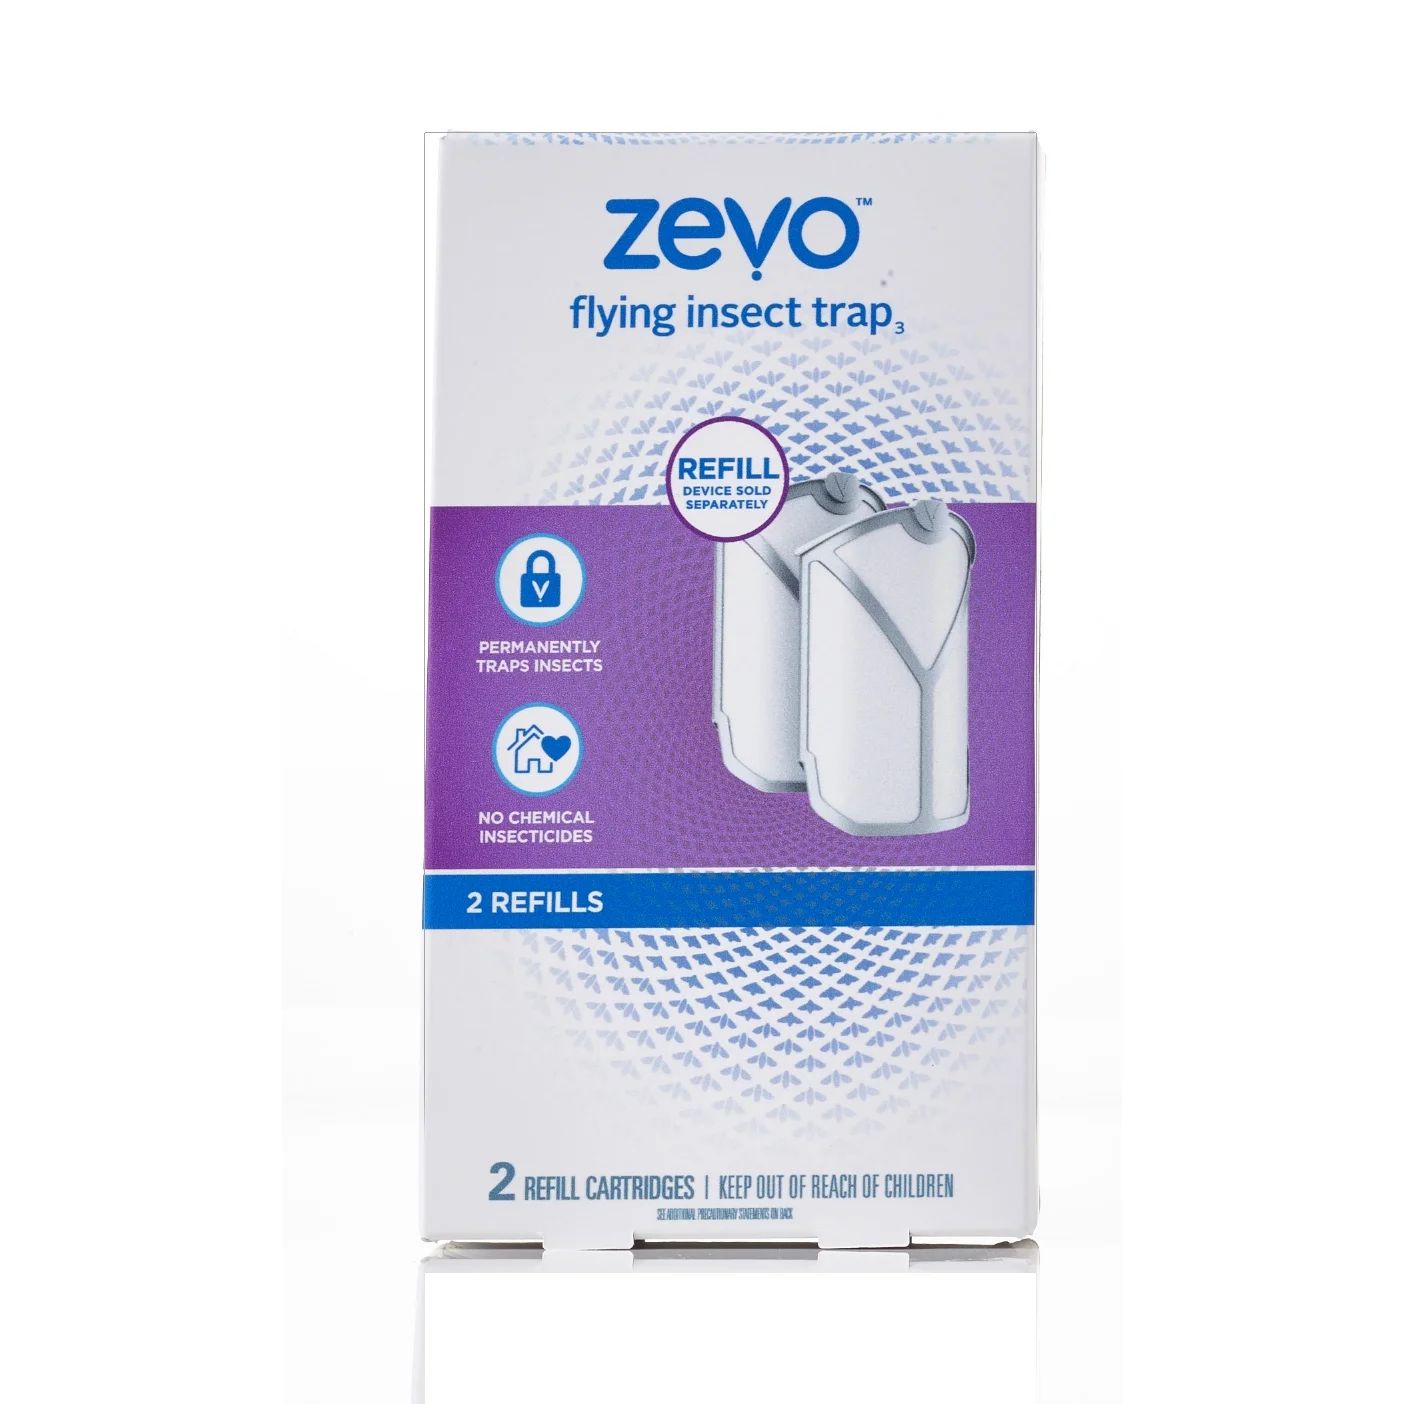 Zevo Flying Insect Trap Refill Cartridges - 2 Count | Walmart (US)